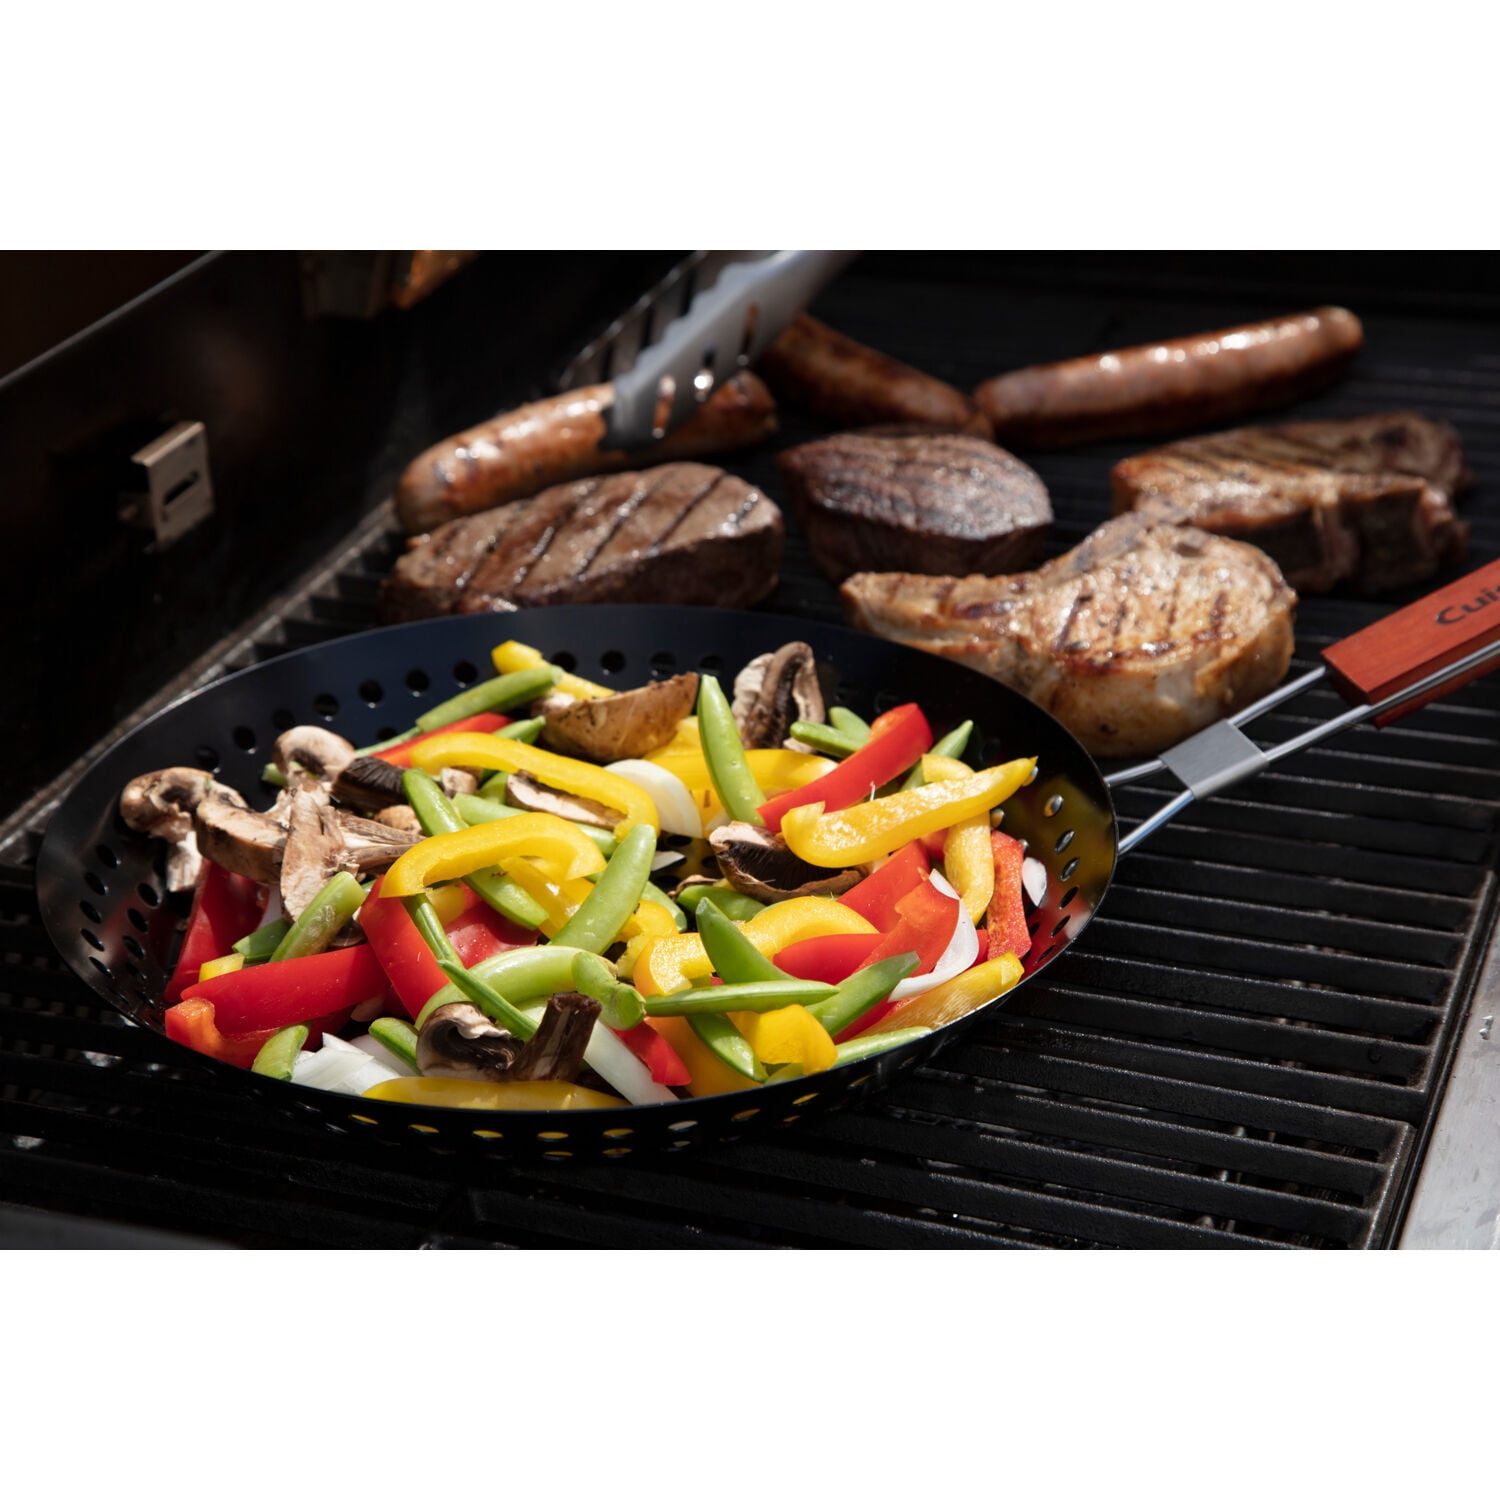 Cuisinart 10-In. Cast Iron Griddle Pan for Grill, Campfire, Stovetop, or  Oven - Non-Stick, Black - Ideal for Practical and Functional Cooking in the Grill  Cookware department at